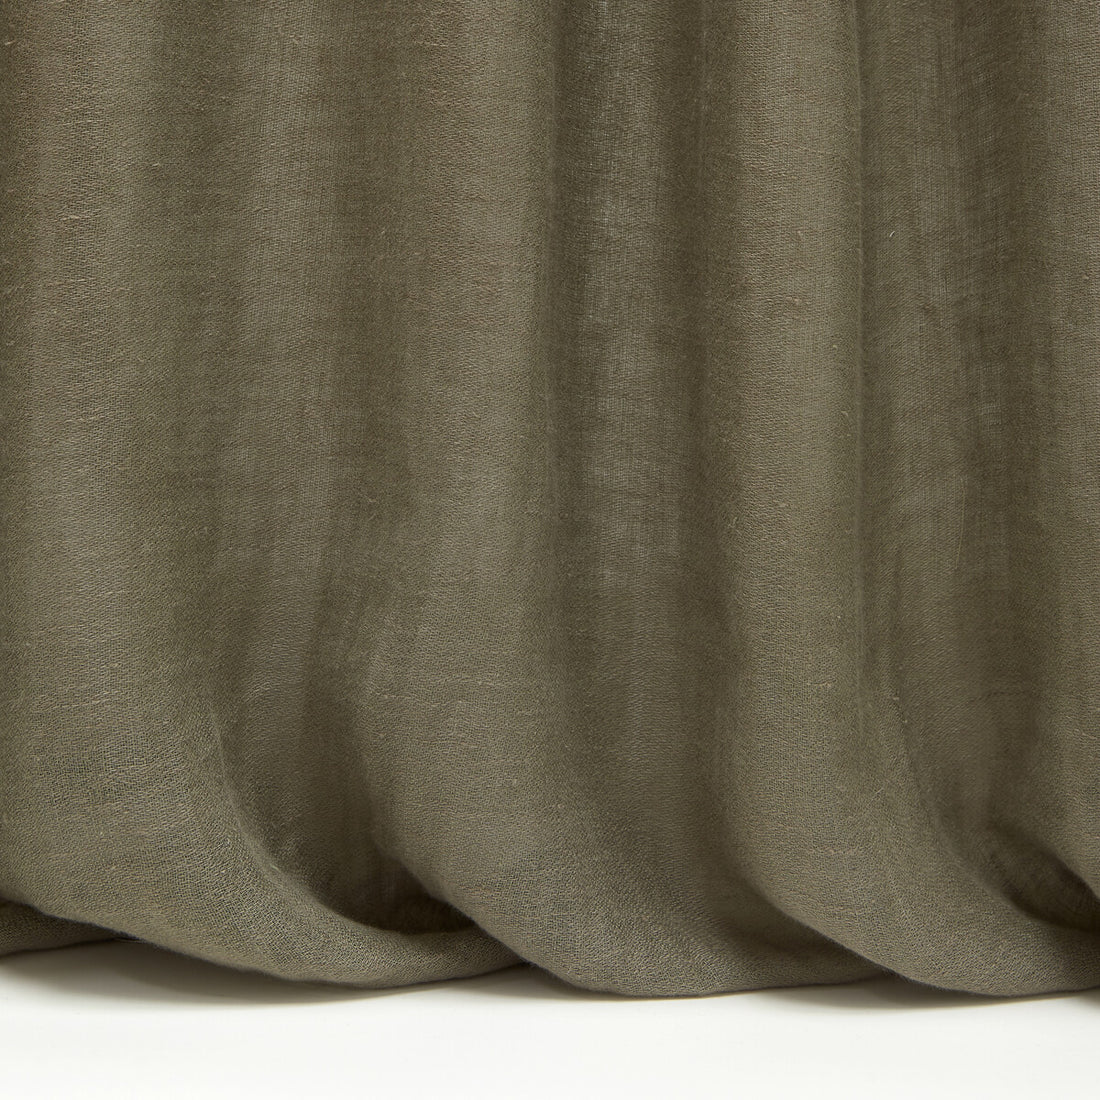 Relax fabric in 1 color - pattern LZ-30331.01.0 - by Kravet Design in the Lizzo collection